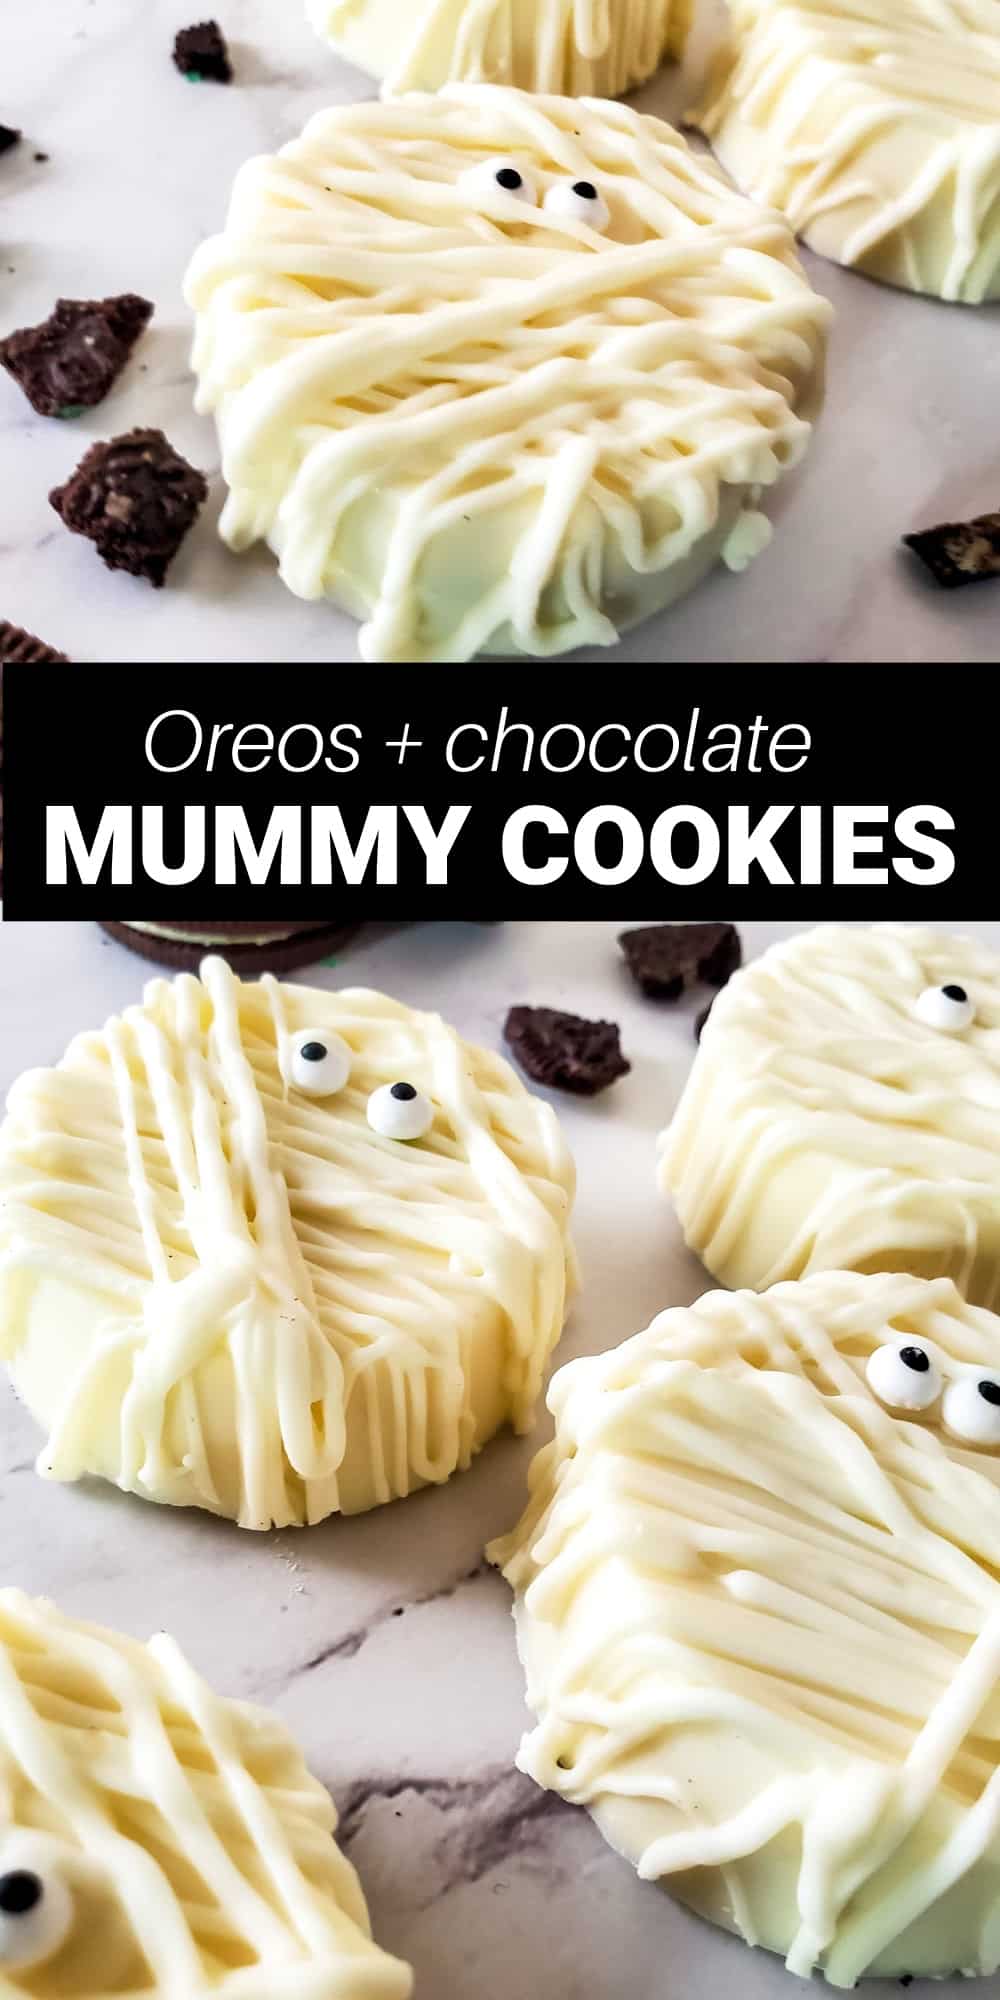 This easy no bake treat is the cutest Halloween dessert perfect for any party. Oreo cookies are covered in white chocolate with cute candy eyes. It's a perfect treat to get the kids to help with. 